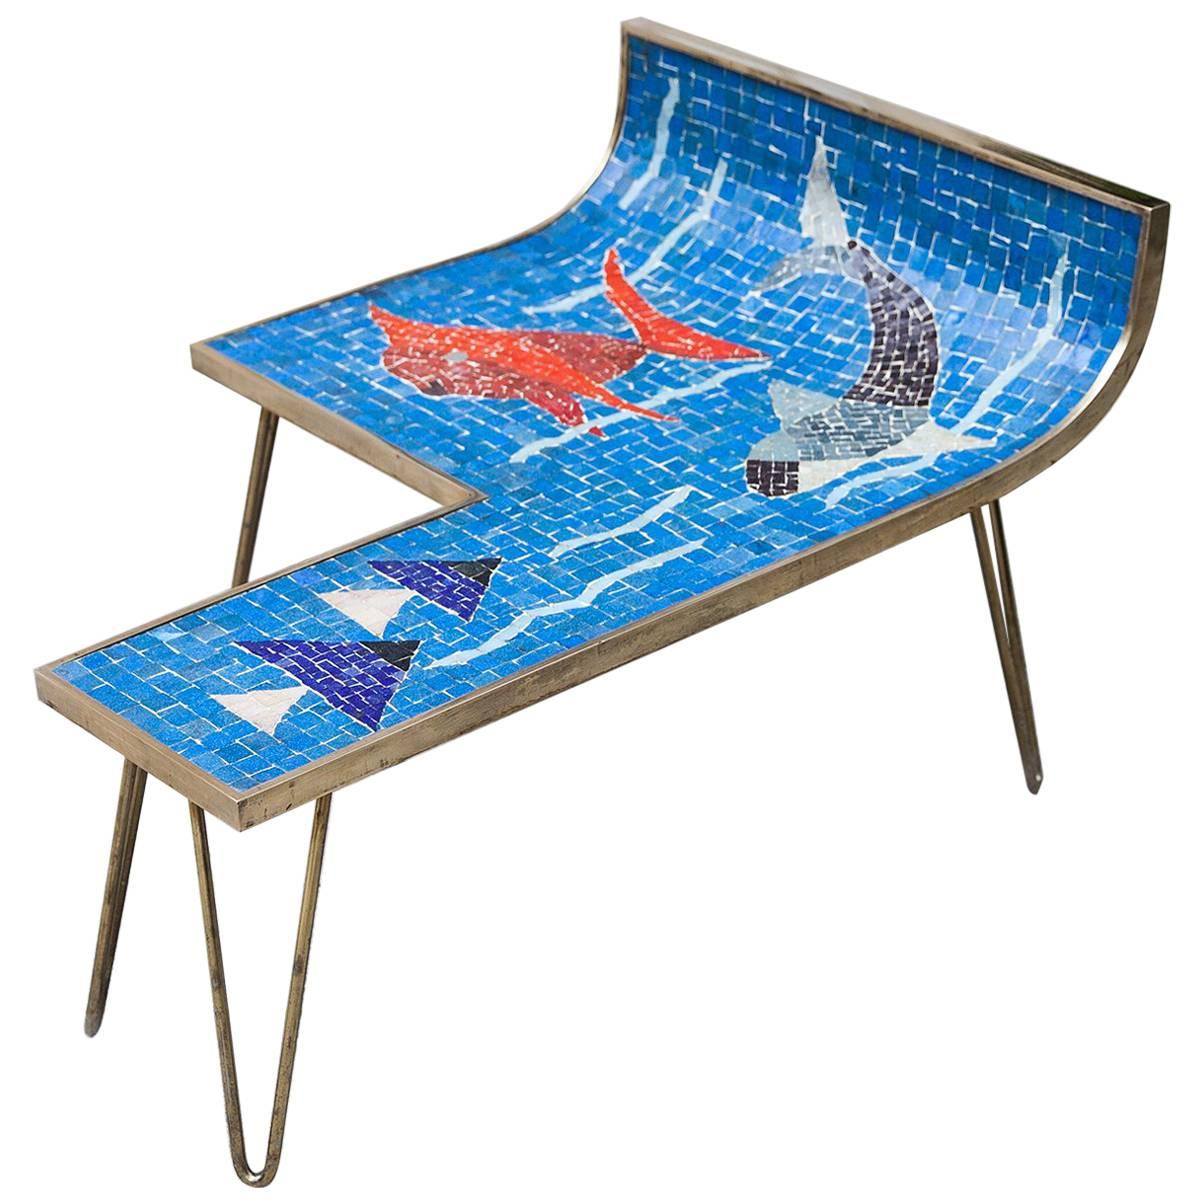 Mosaic Table Blue Ocean by Berthold Muller, Germany, 1950s